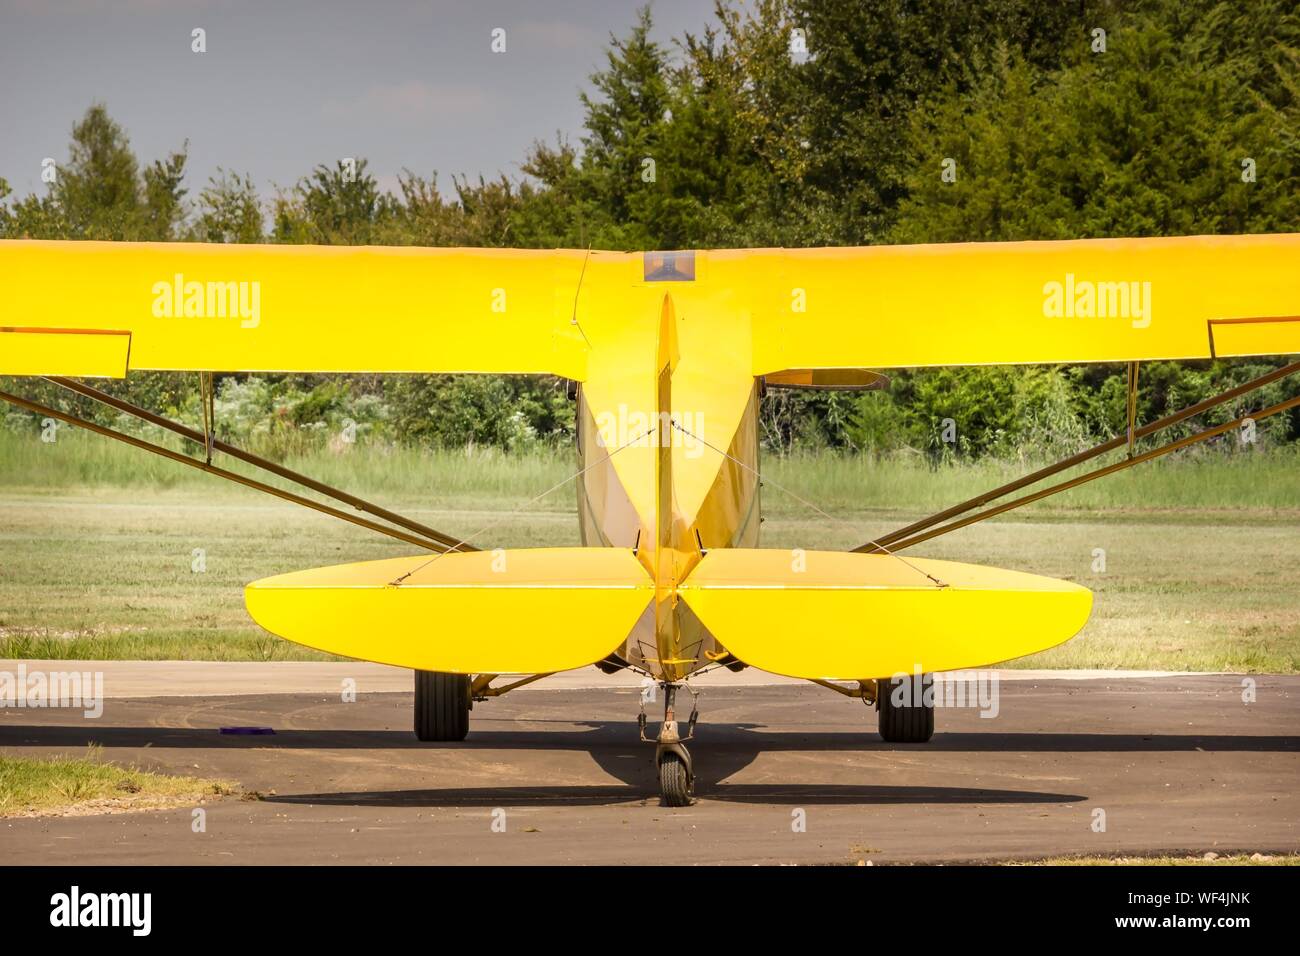 Yellow Air Vehicle On Road Stock Photo